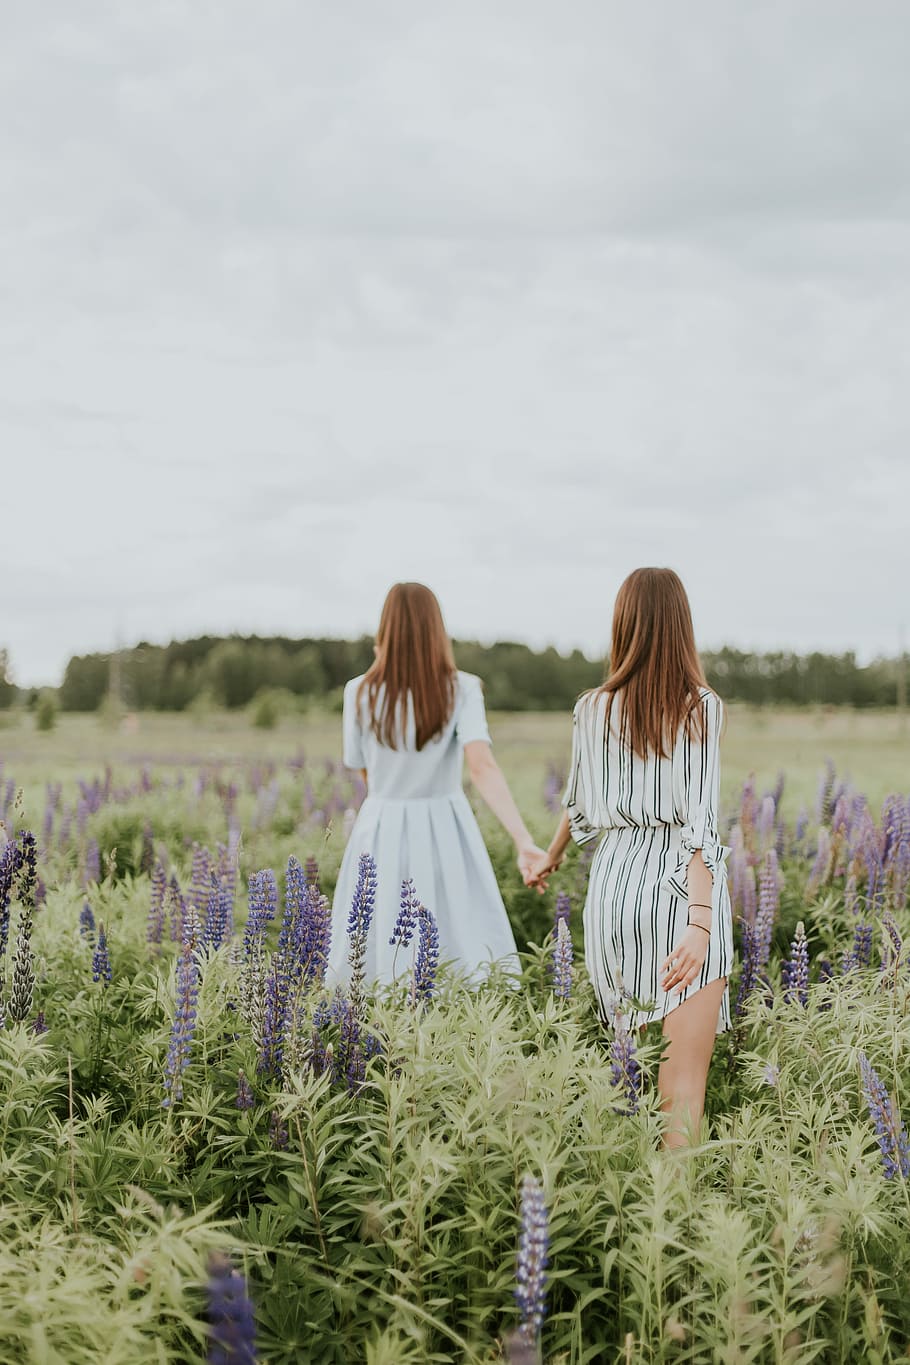 two women surrounded by lavender under nimbus clouds, two women walking in lavender flower field while holding hands at daytime